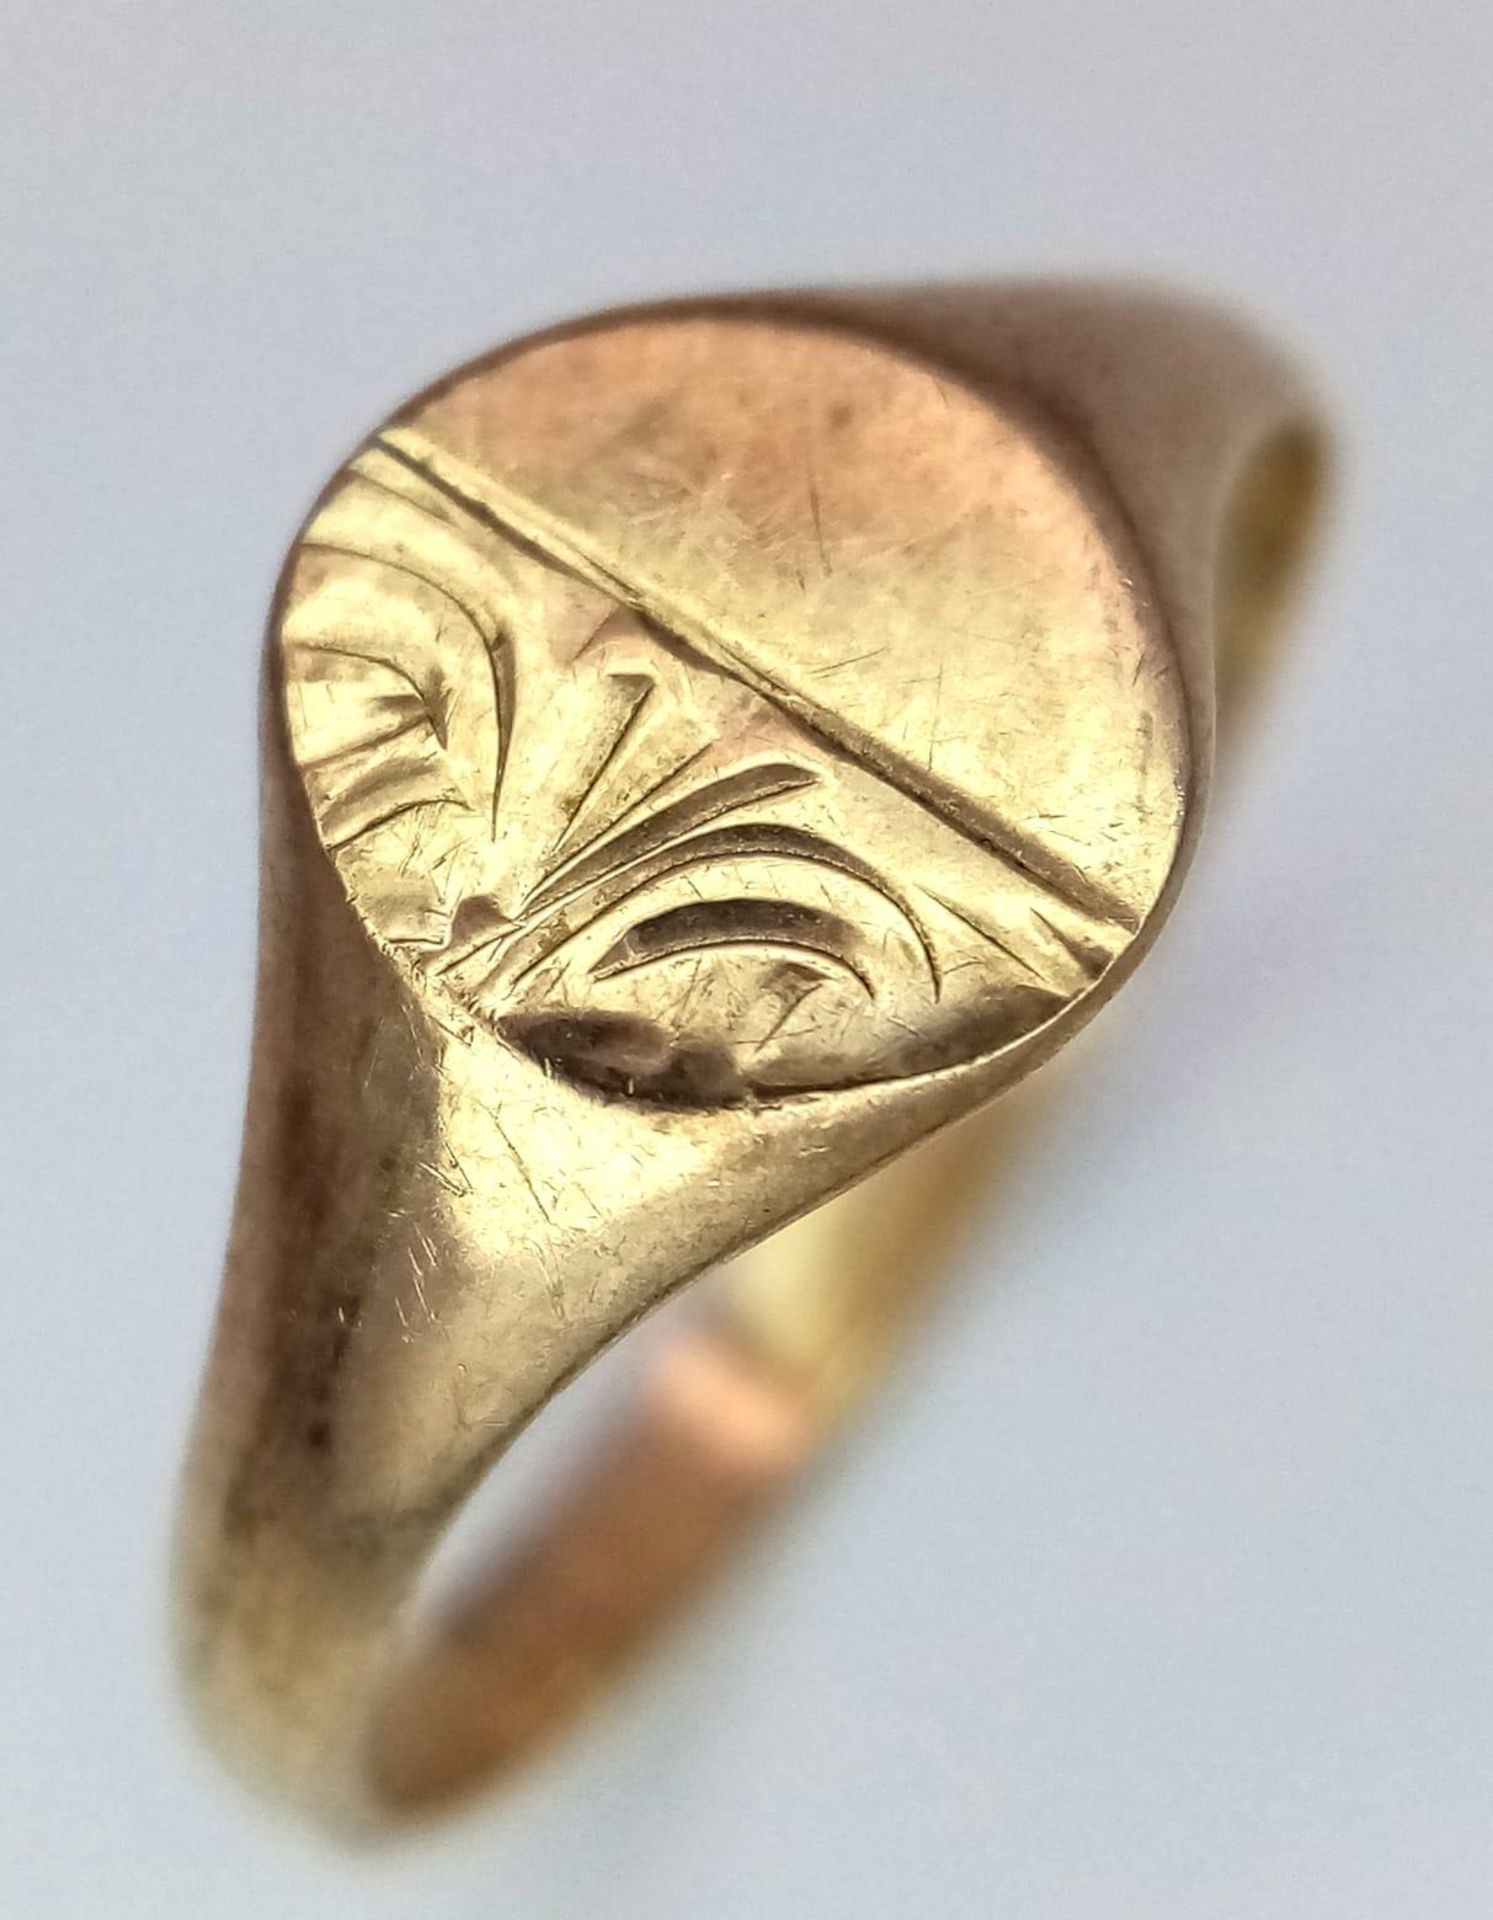 A Vintage 9K Yellow Gold Small Signet Ring. Size K. 1.3g weight.